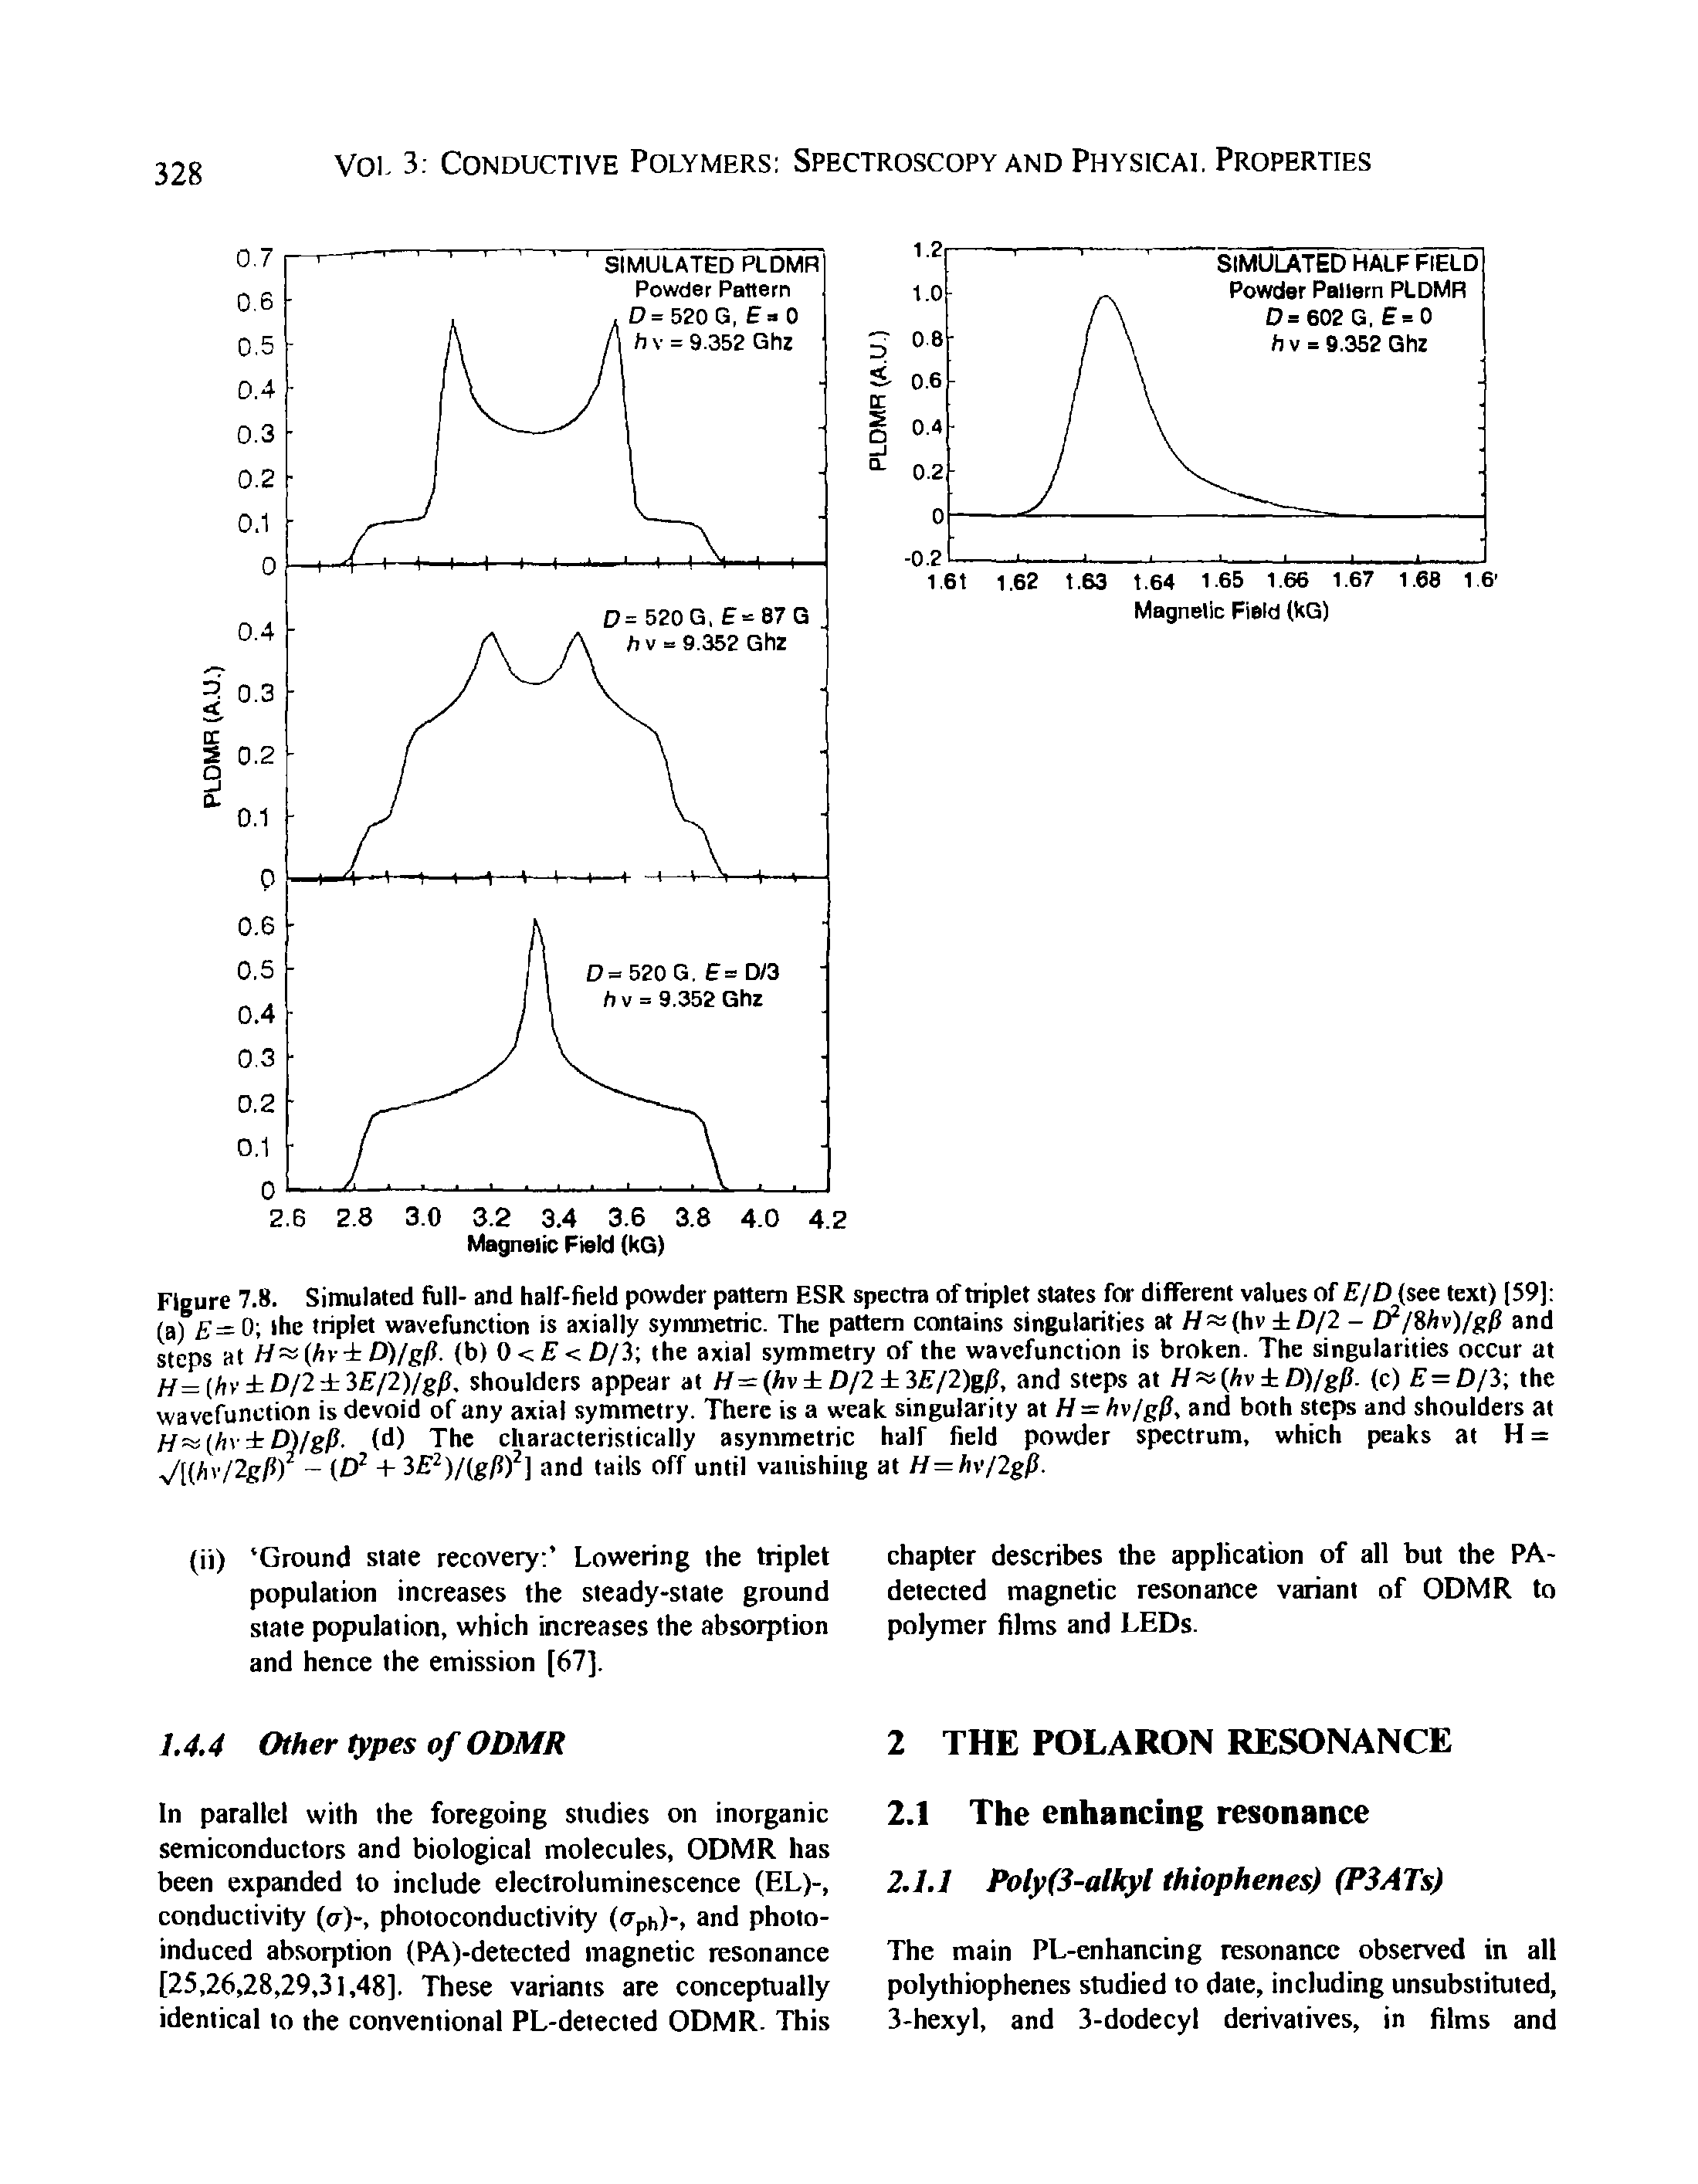 Figure 7.8. Simulated fijll- and half-field powder pattern ESR spectra of triplet states for different values of E/D (see text) [59] (a) = 0 the triplet wavefunction is axially symmetric. The pattern contains singularities at // (hv D/2 - /8hv)/gli and steps at D)/gP. (b) 0 E <. D/i the axial symmetry of the wavefunction is broken. The singularities occur at...